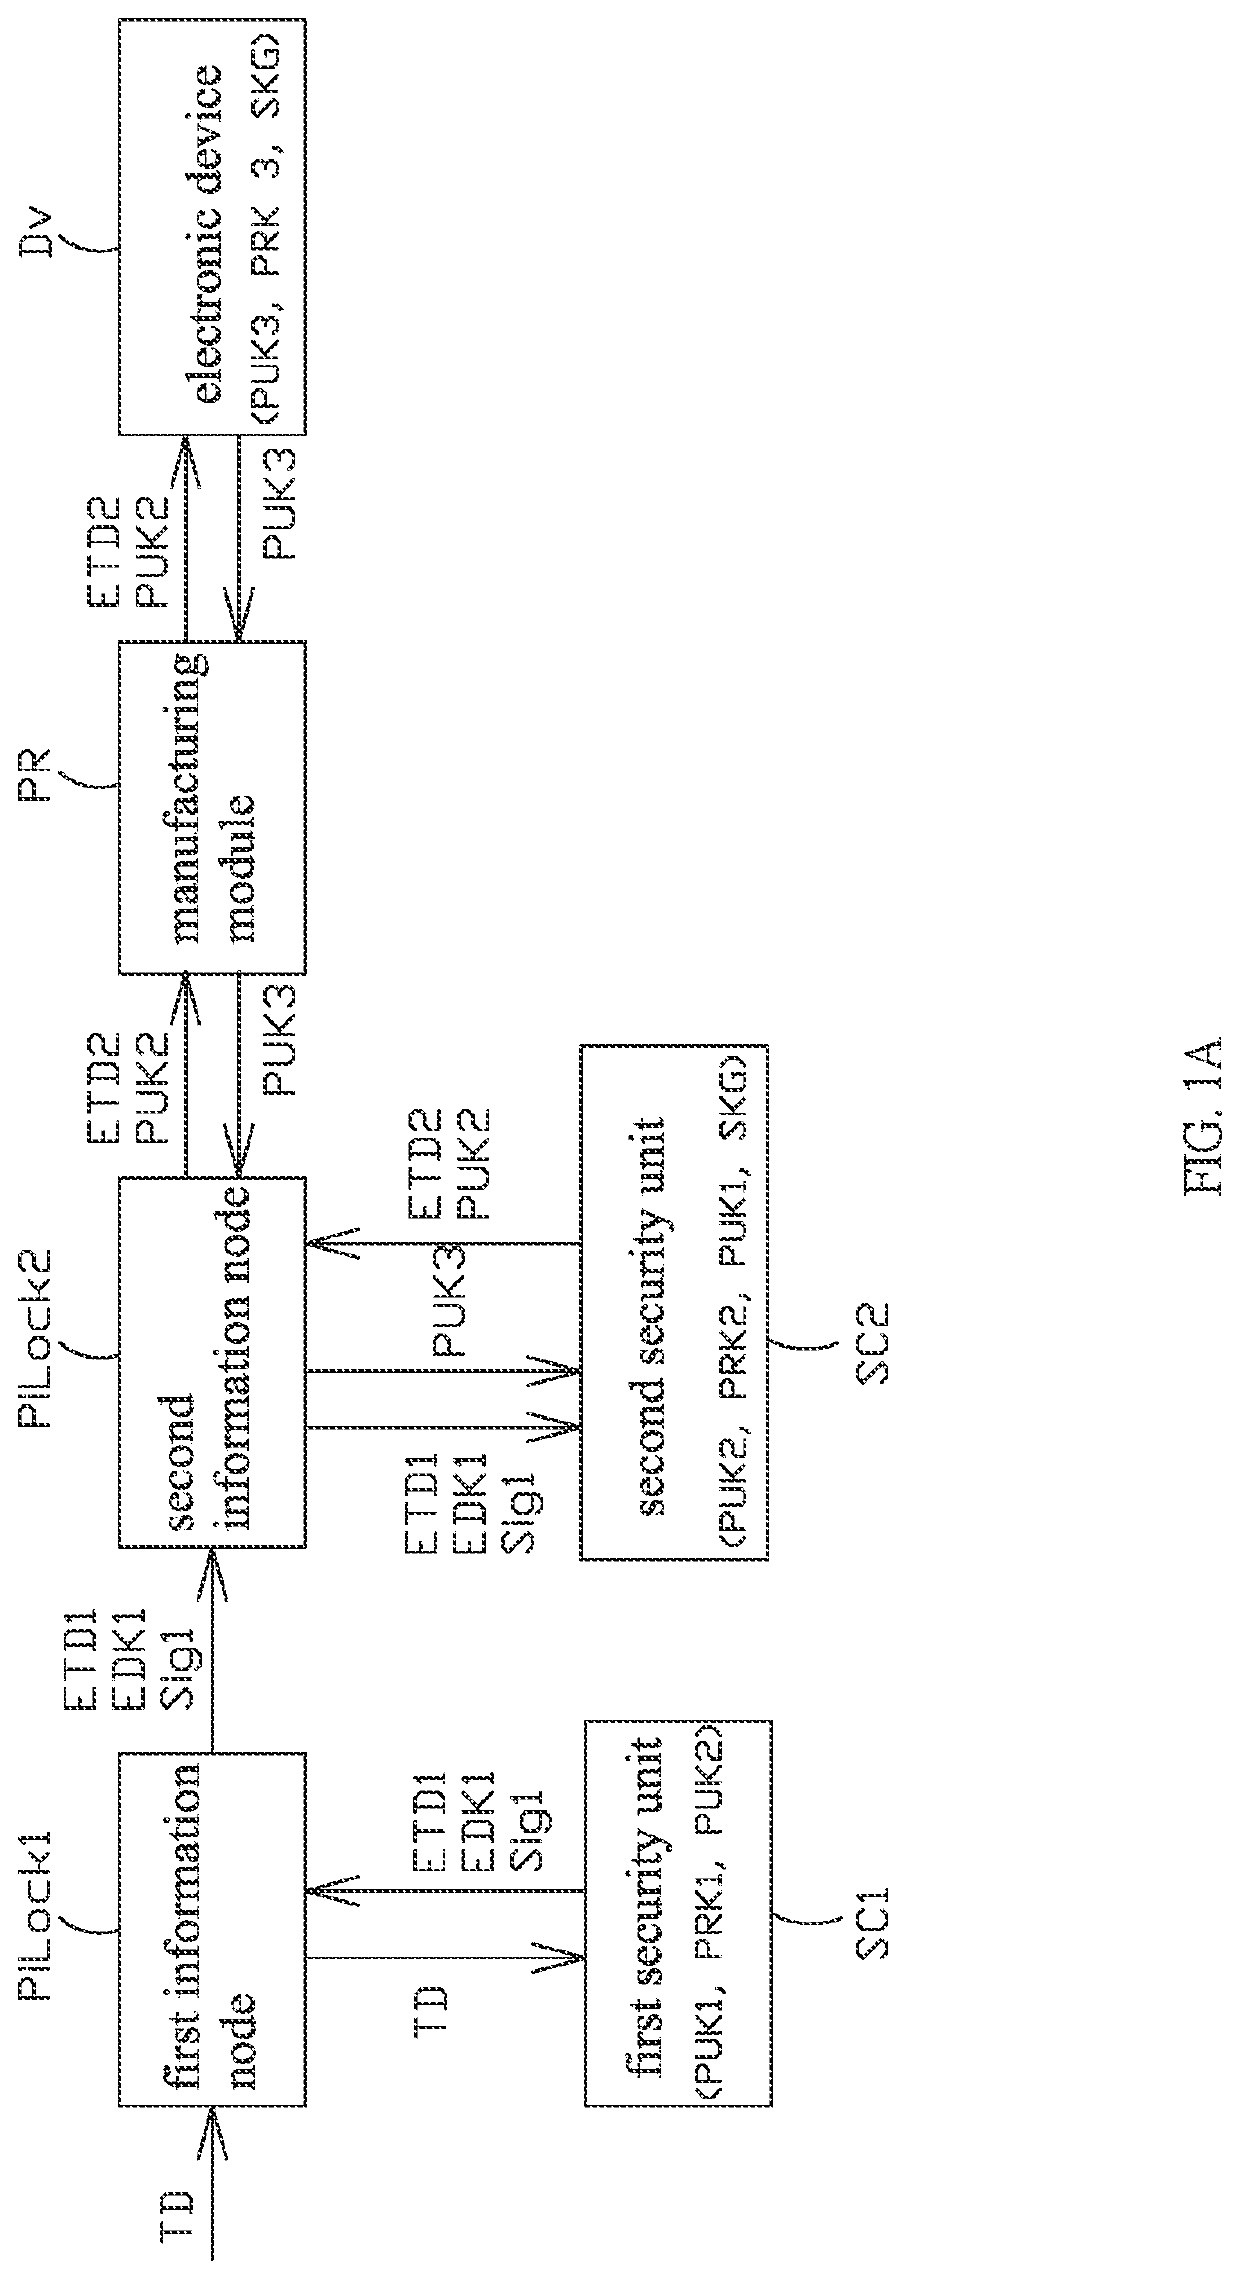 System and method for securely transmitting electronic information